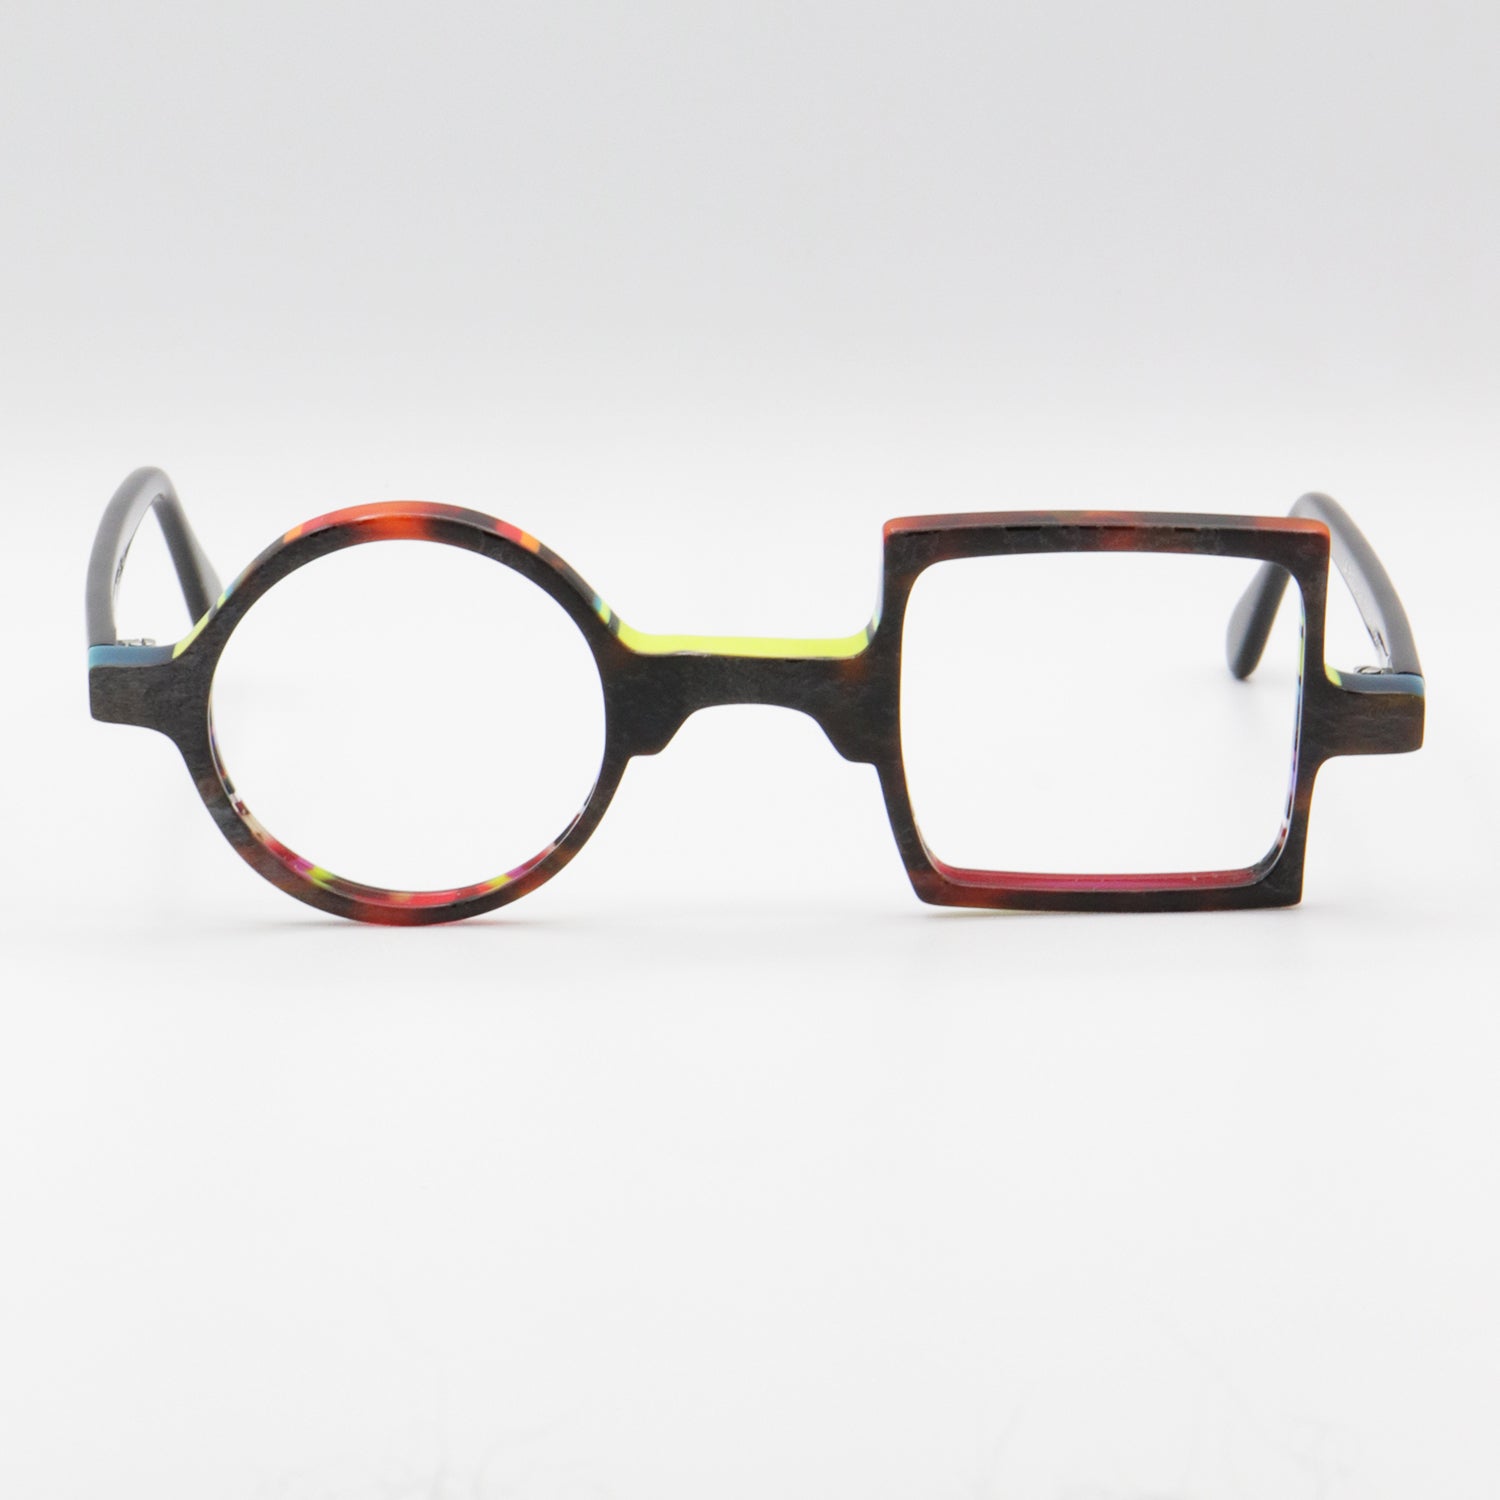 Square Glasses - Black and Colored Frames